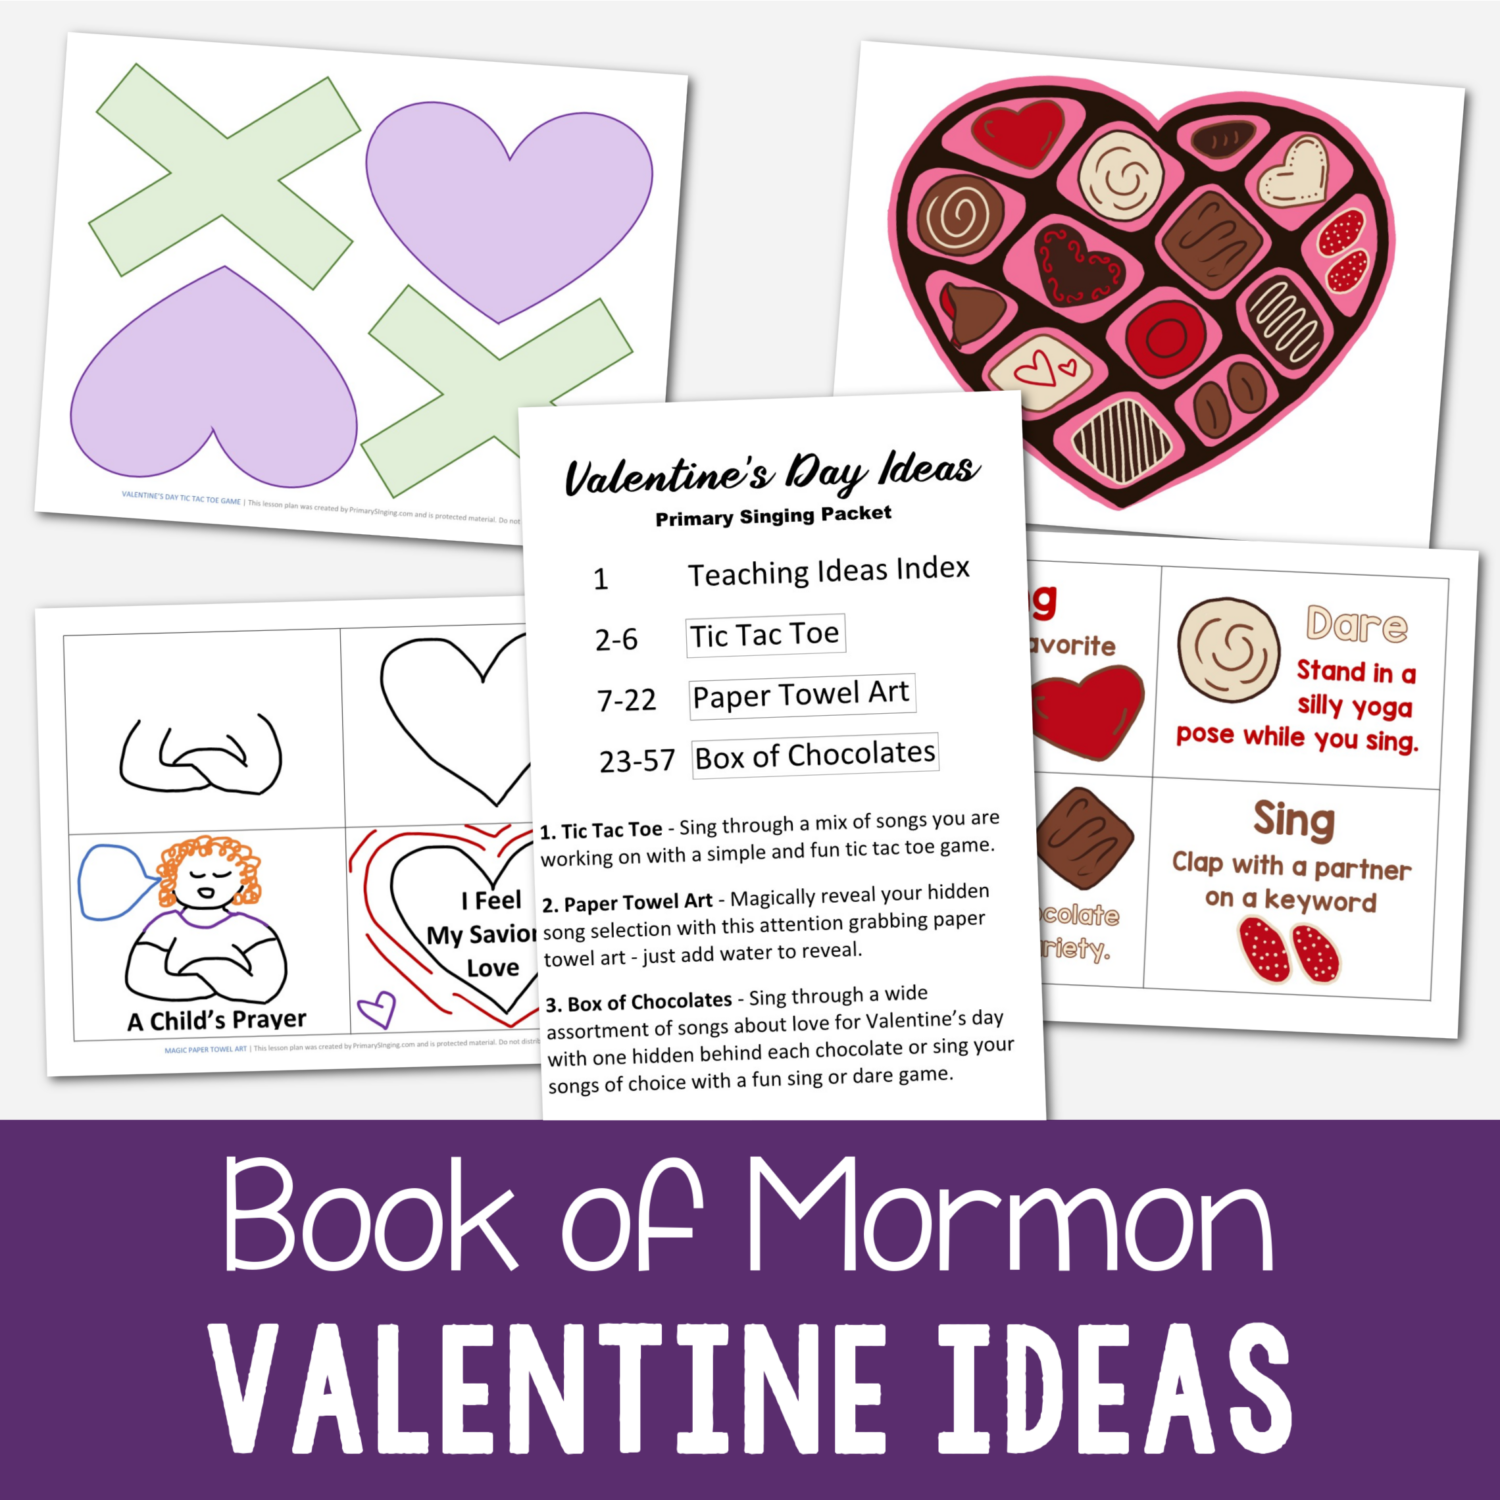 Book of Mormon Valentine's Day Ideas for February's INSTANT Primary Singing packet - include tic tac toe, paper towel art, and box of chocolate singing time ideas.